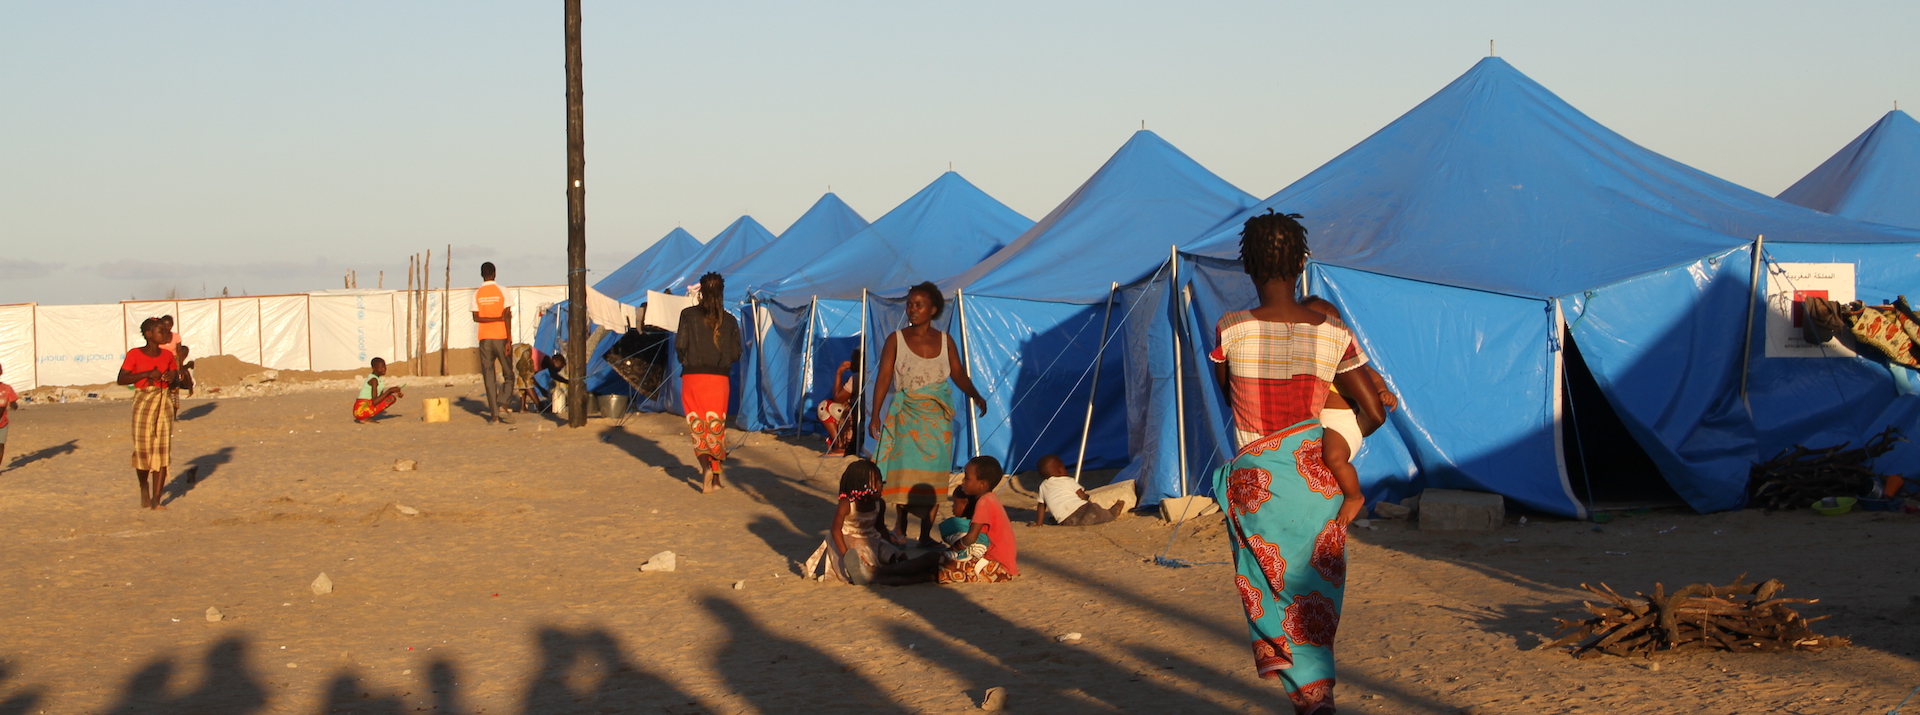 Refugees in the accommodation center set in Beira, Mozambique, after the destruction caused by Cyclone Idai in March 2019